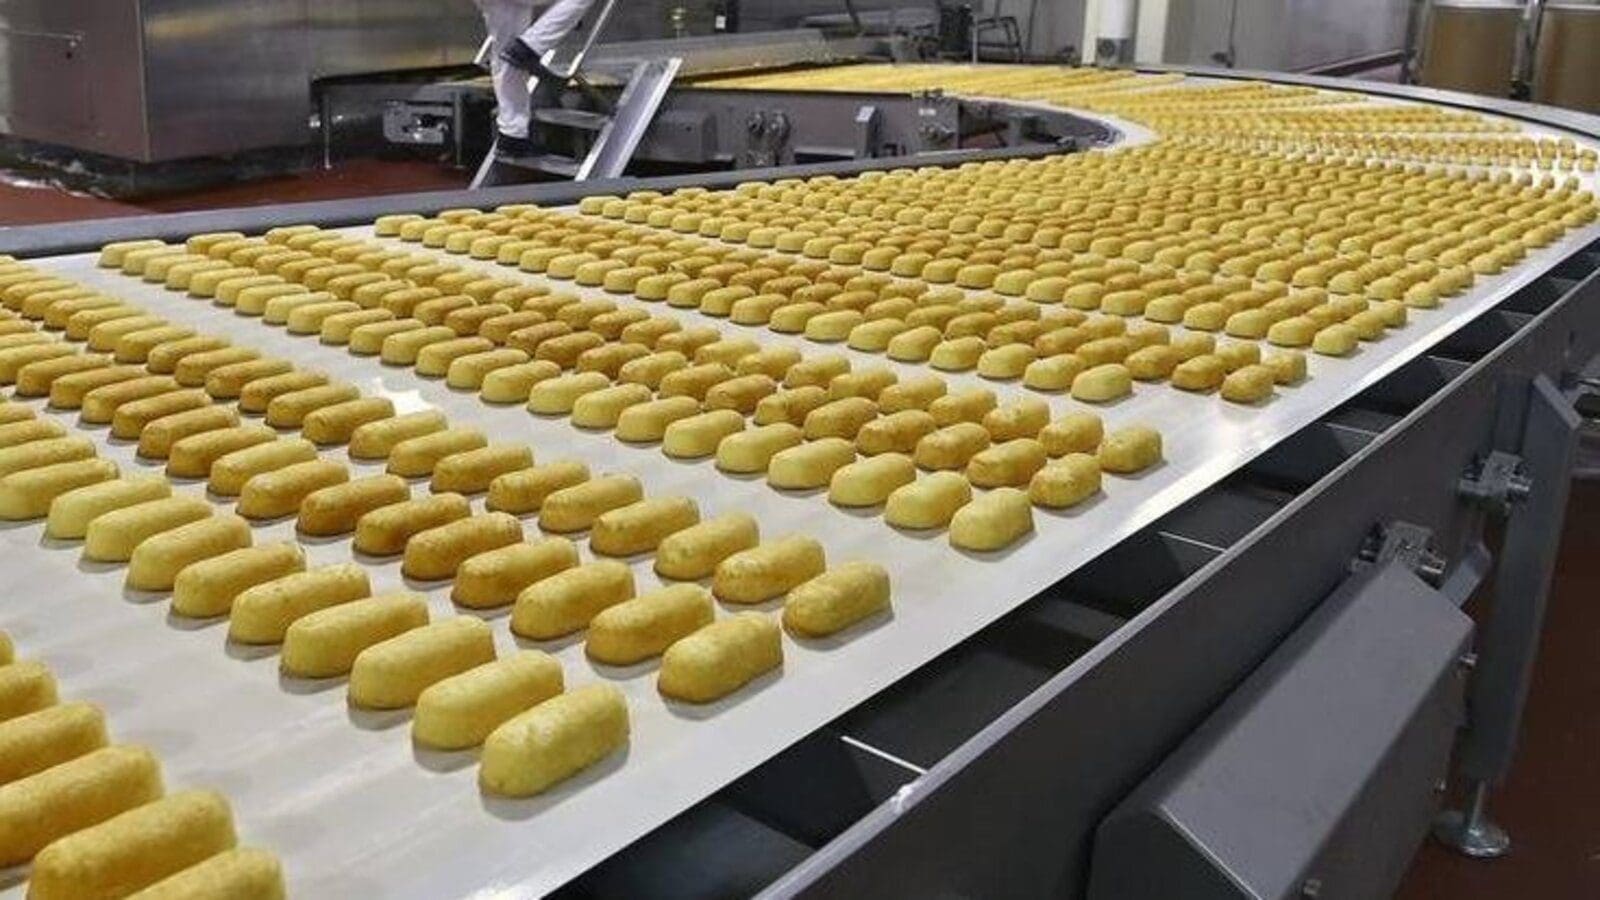 Egyptian snacks giant Edita Food enters the frozen bakery segment by acquiring Fancy Foods for US$12M